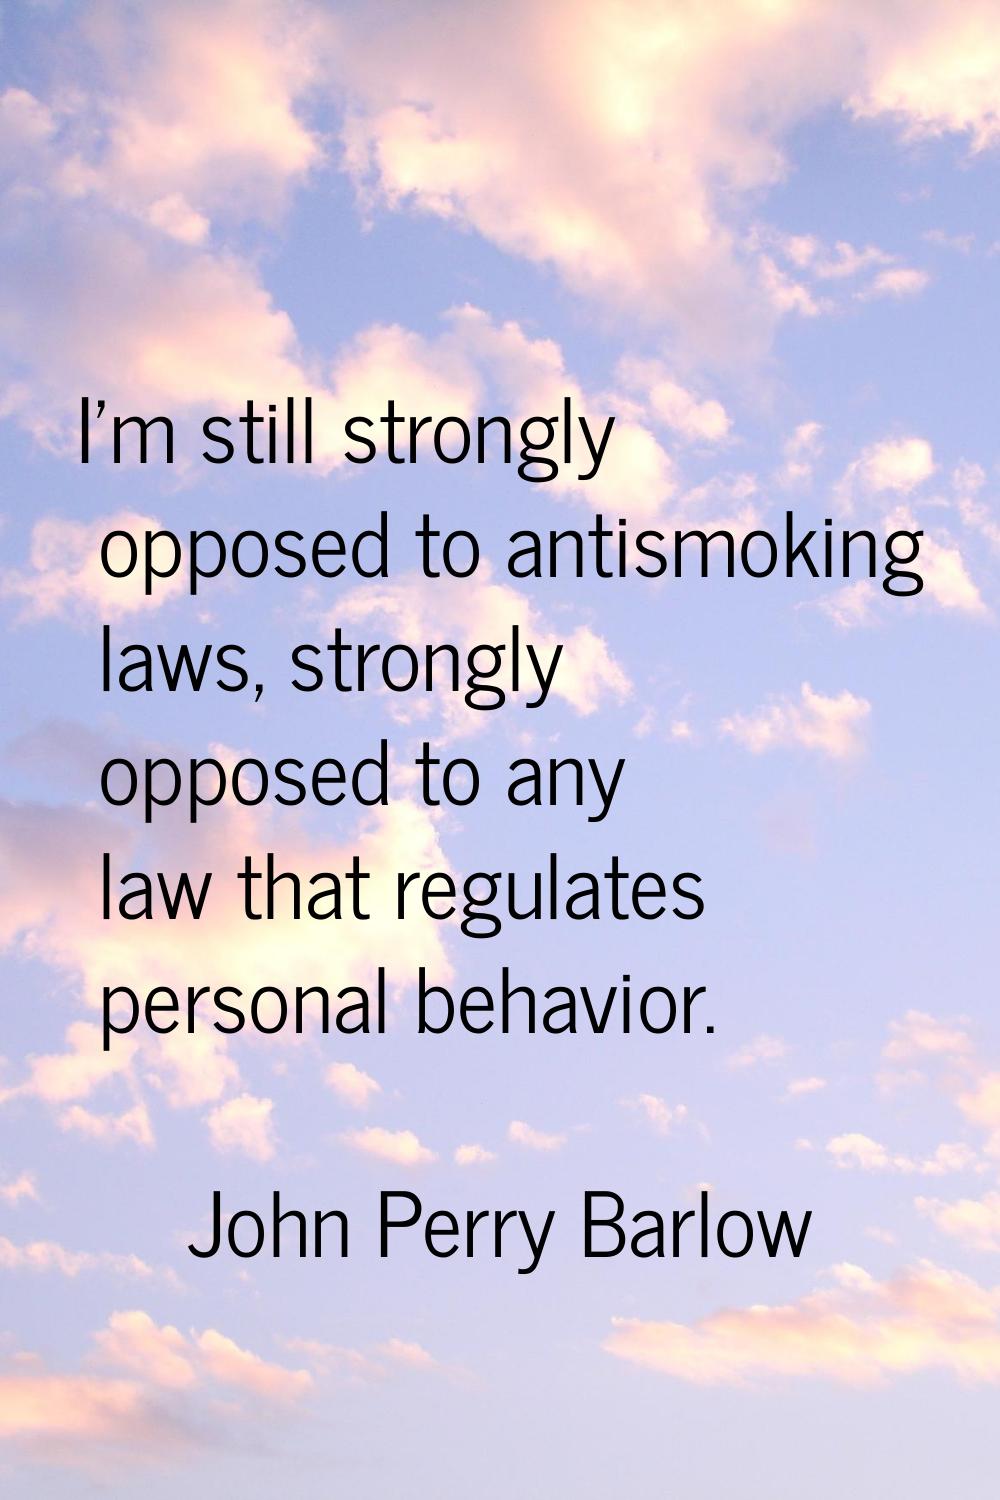 I'm still strongly opposed to antismoking laws, strongly opposed to any law that regulates personal